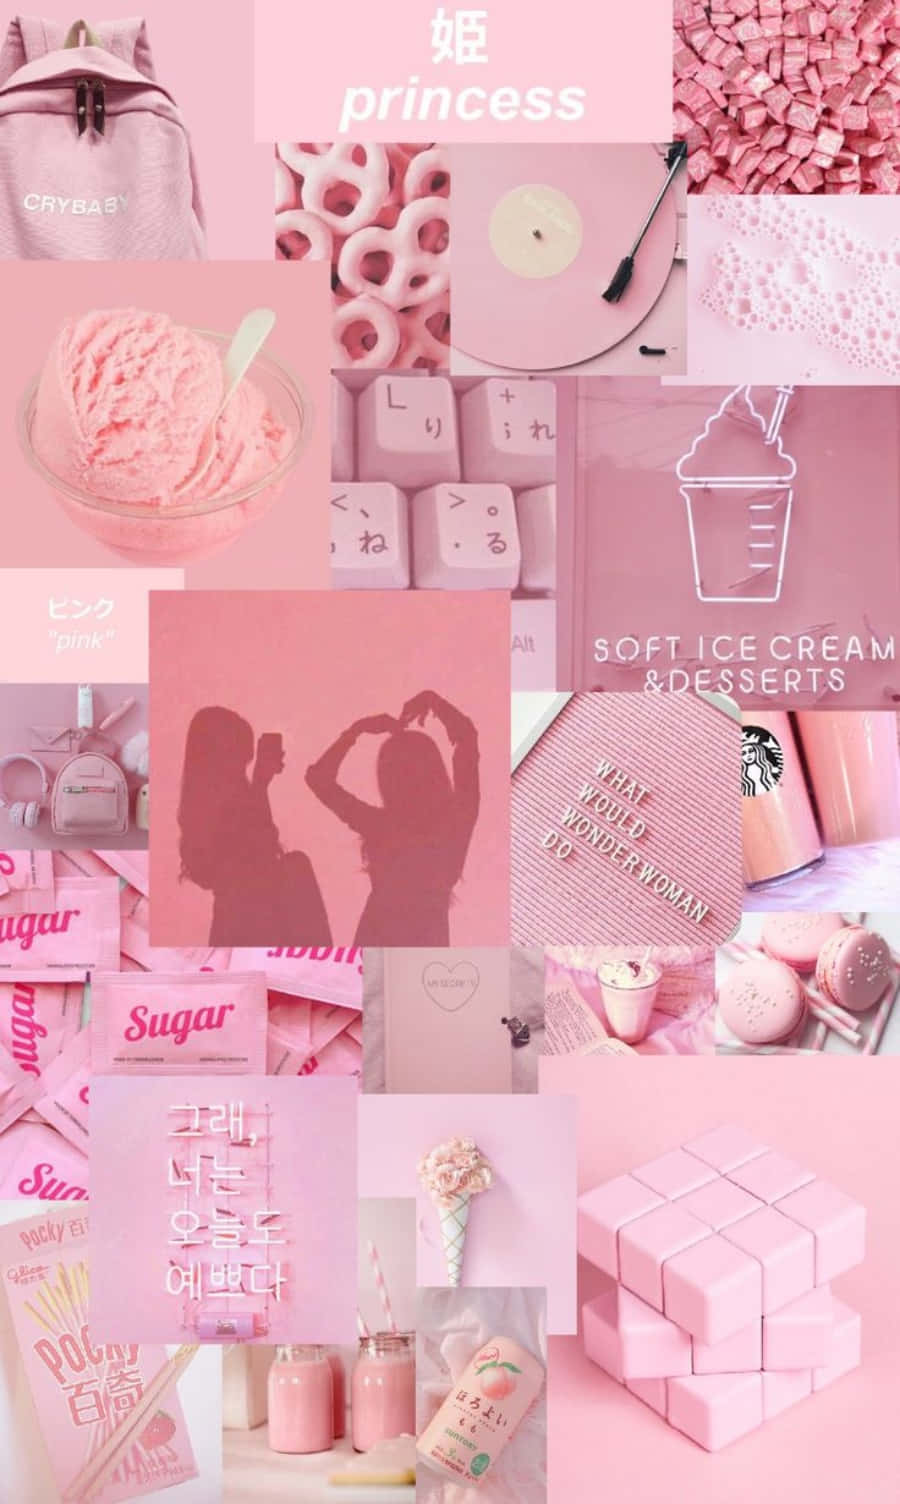 A beautiful pastel pink aesthetic